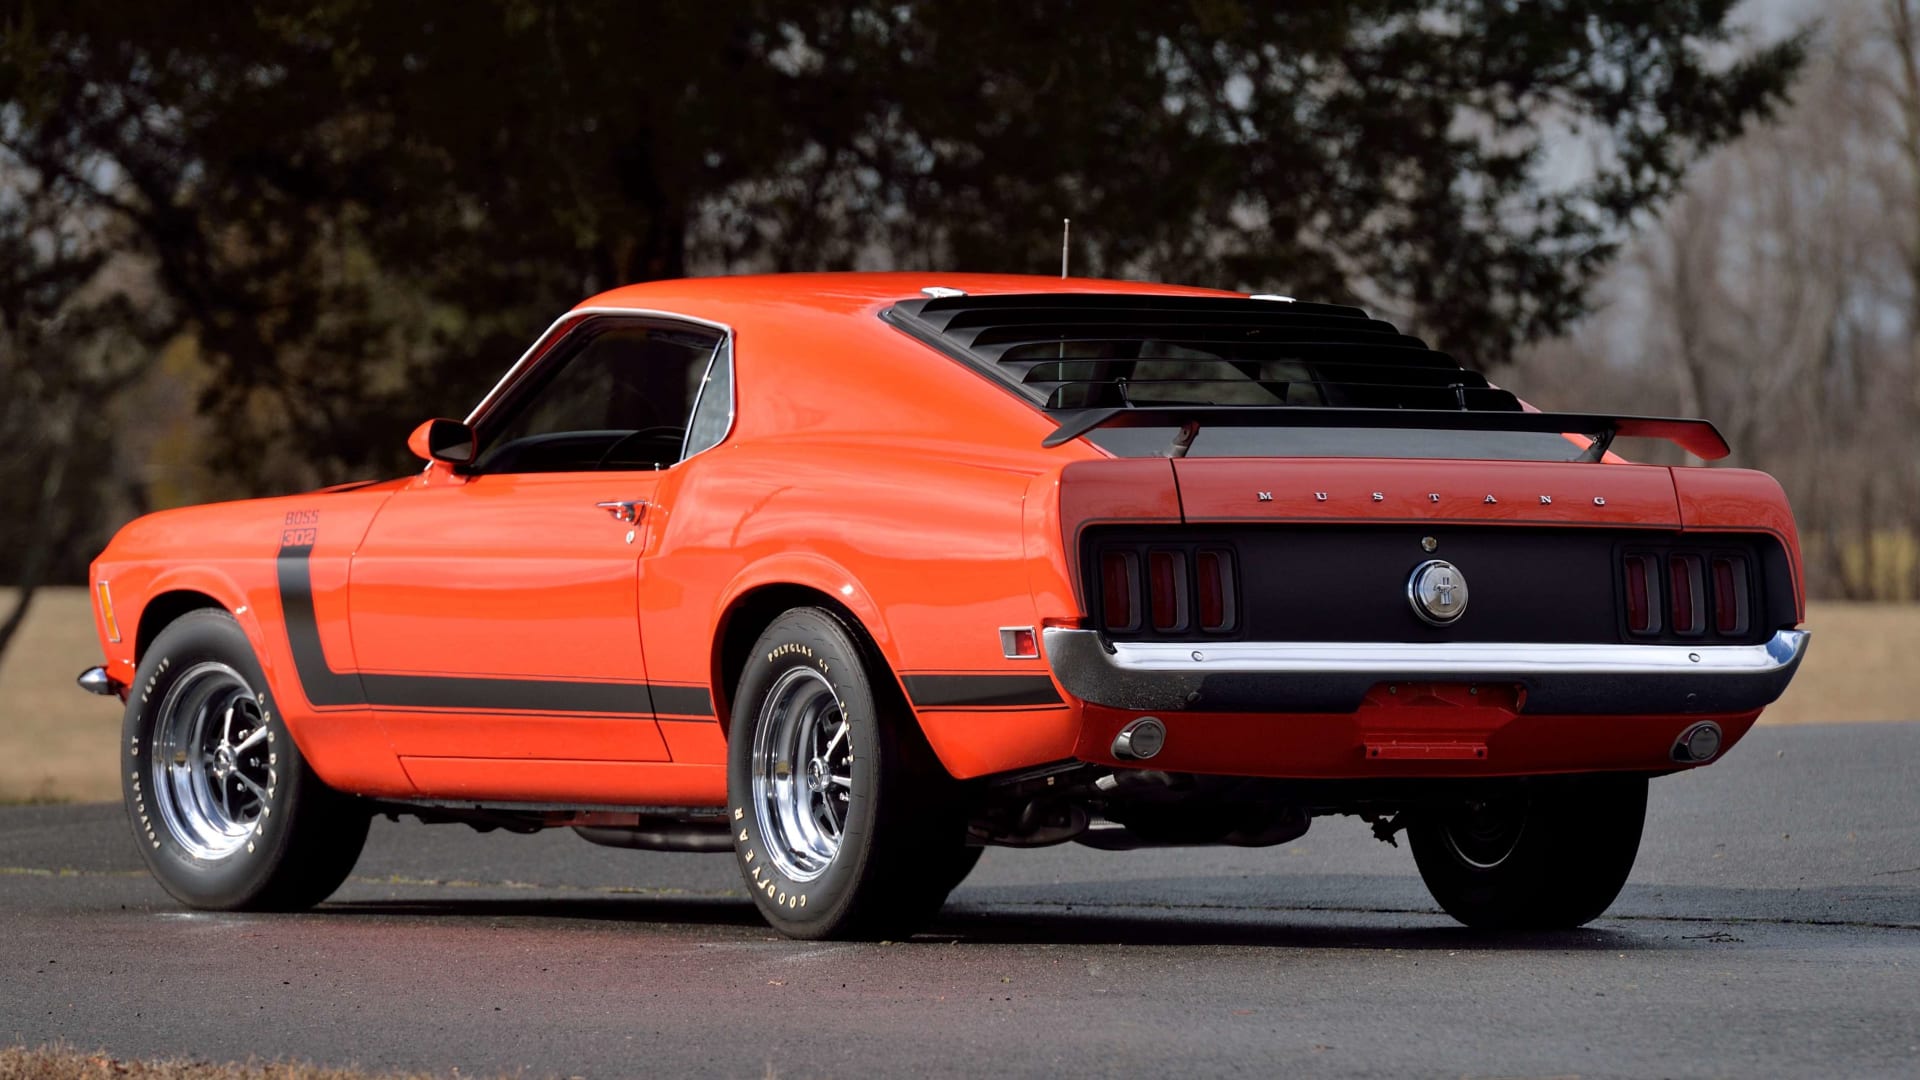 1970 Ford Mustang Boss 302 Fastback at Indy 2020 as T202 - Mecum Auctions